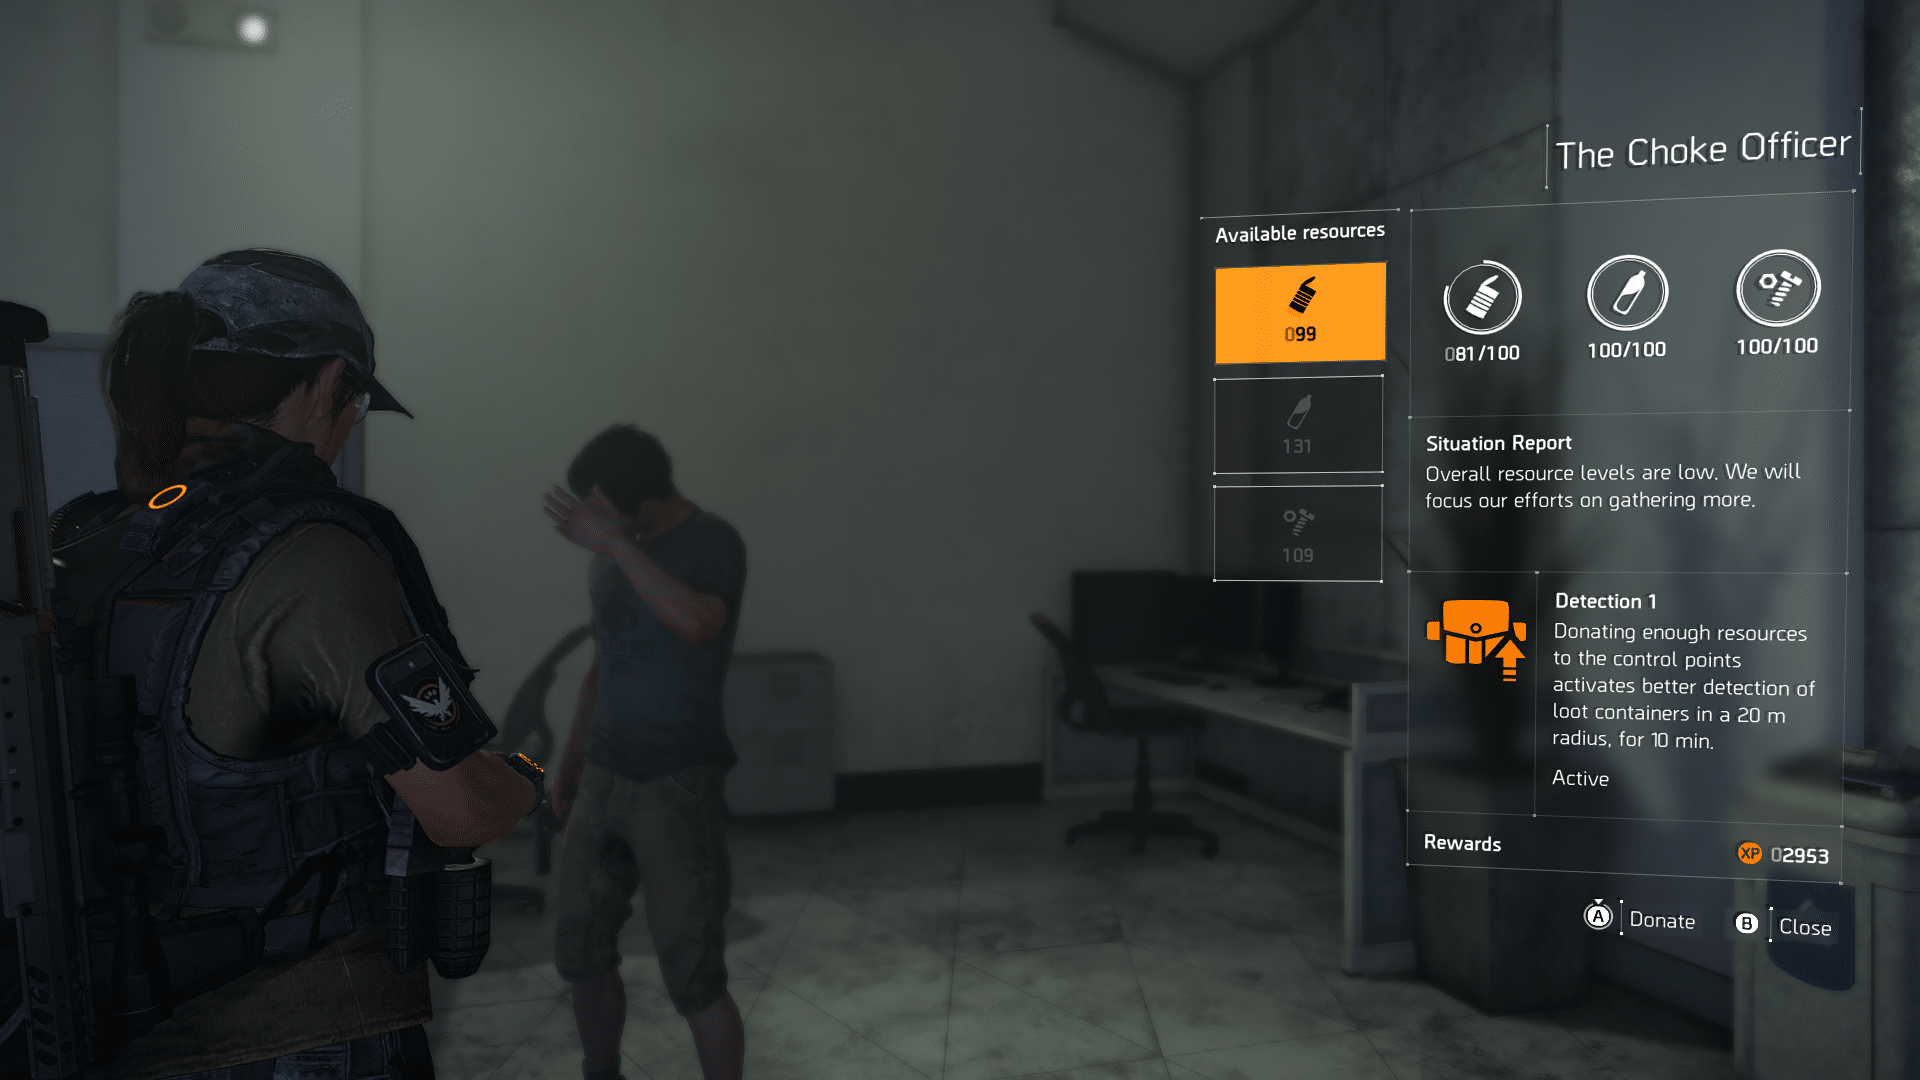 TheDivision2 4 7 2019 8 51 15 PM 794